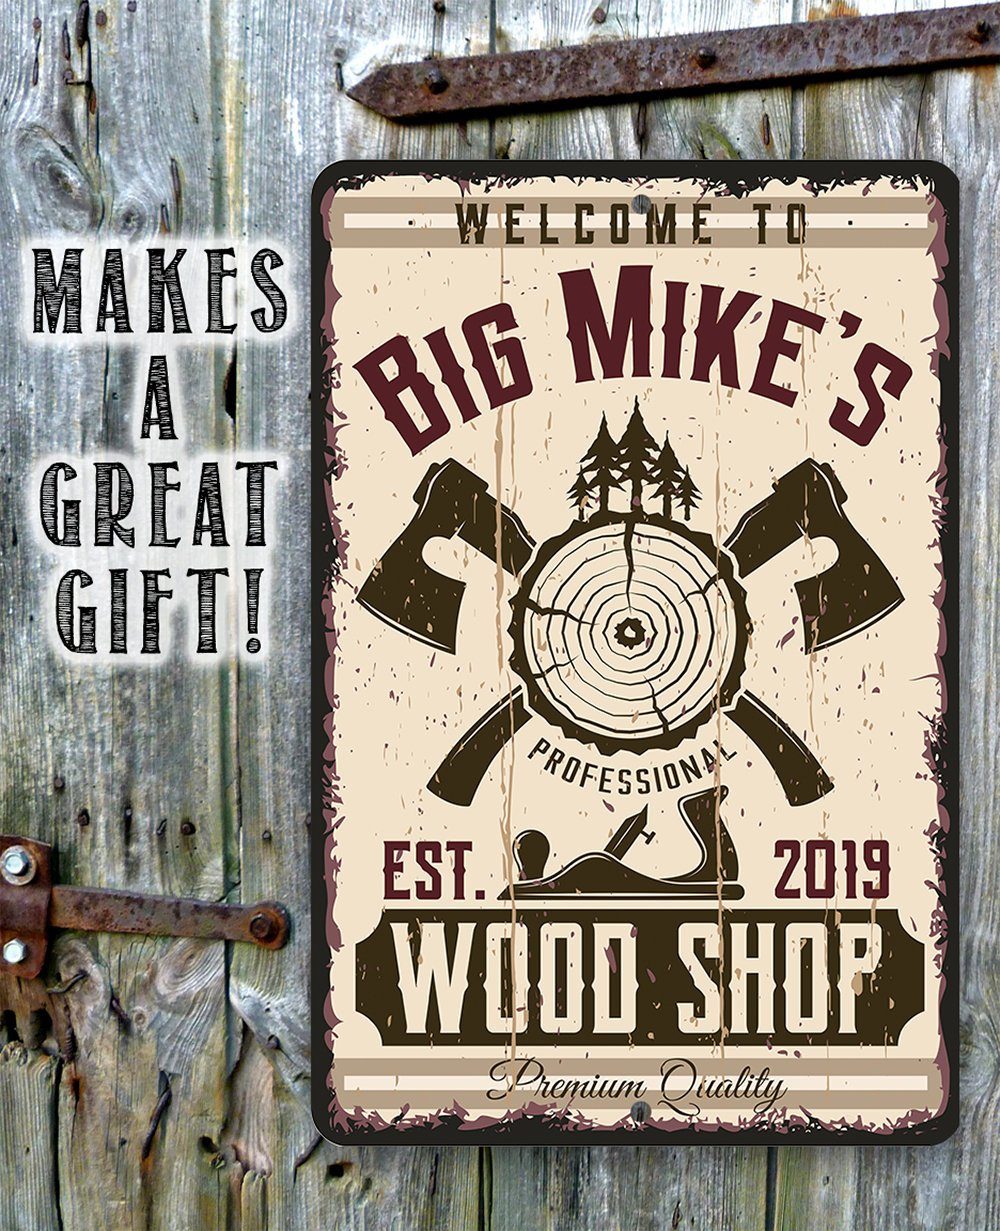 Personalized - Wood Shop Design - Metal Sign | Lone Star Art.